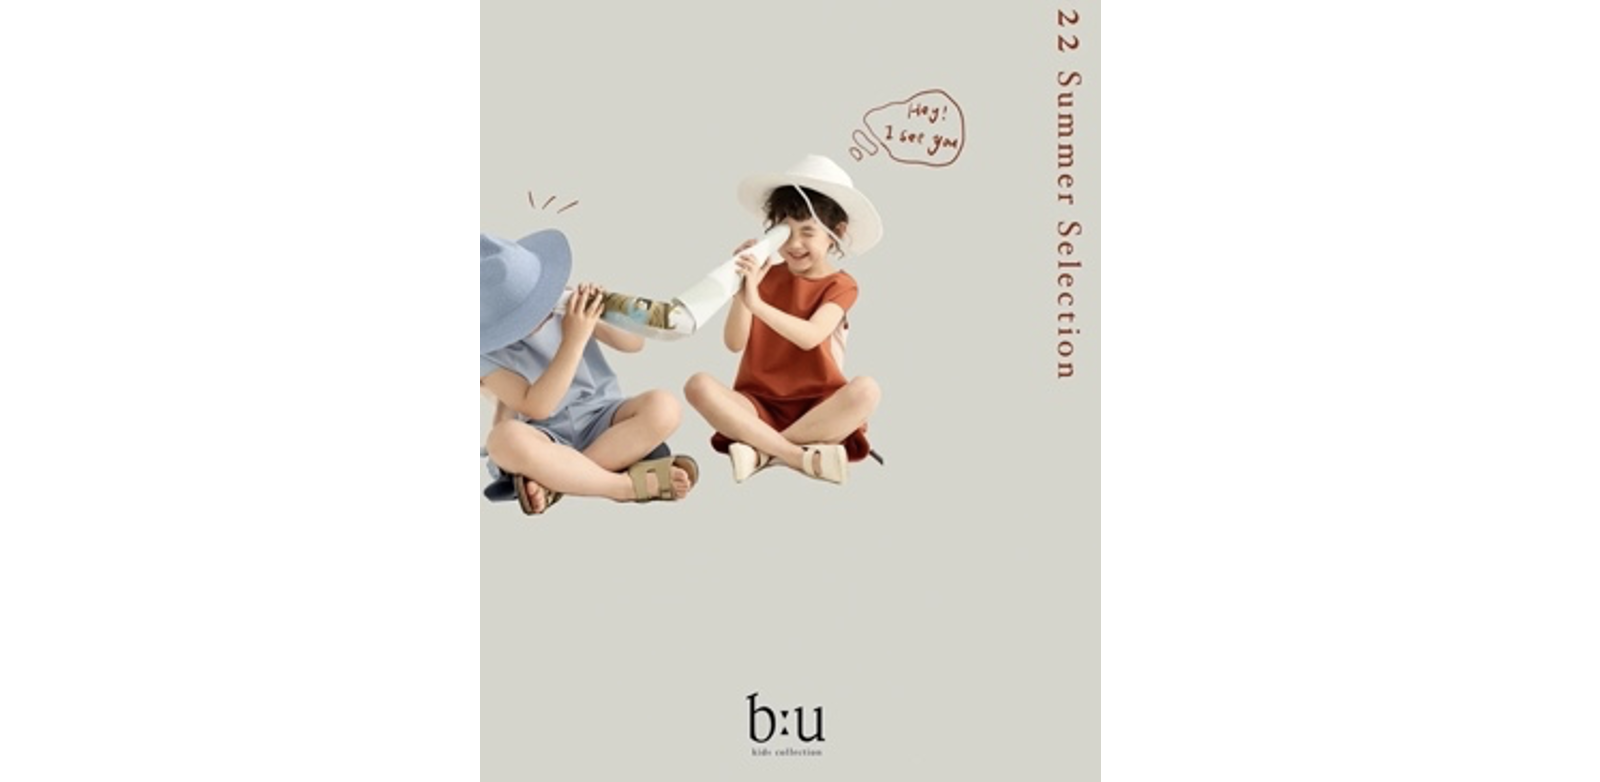 New Consumer Branding: Symbols and Numbers. An example of b:u, a children's clothing brand.